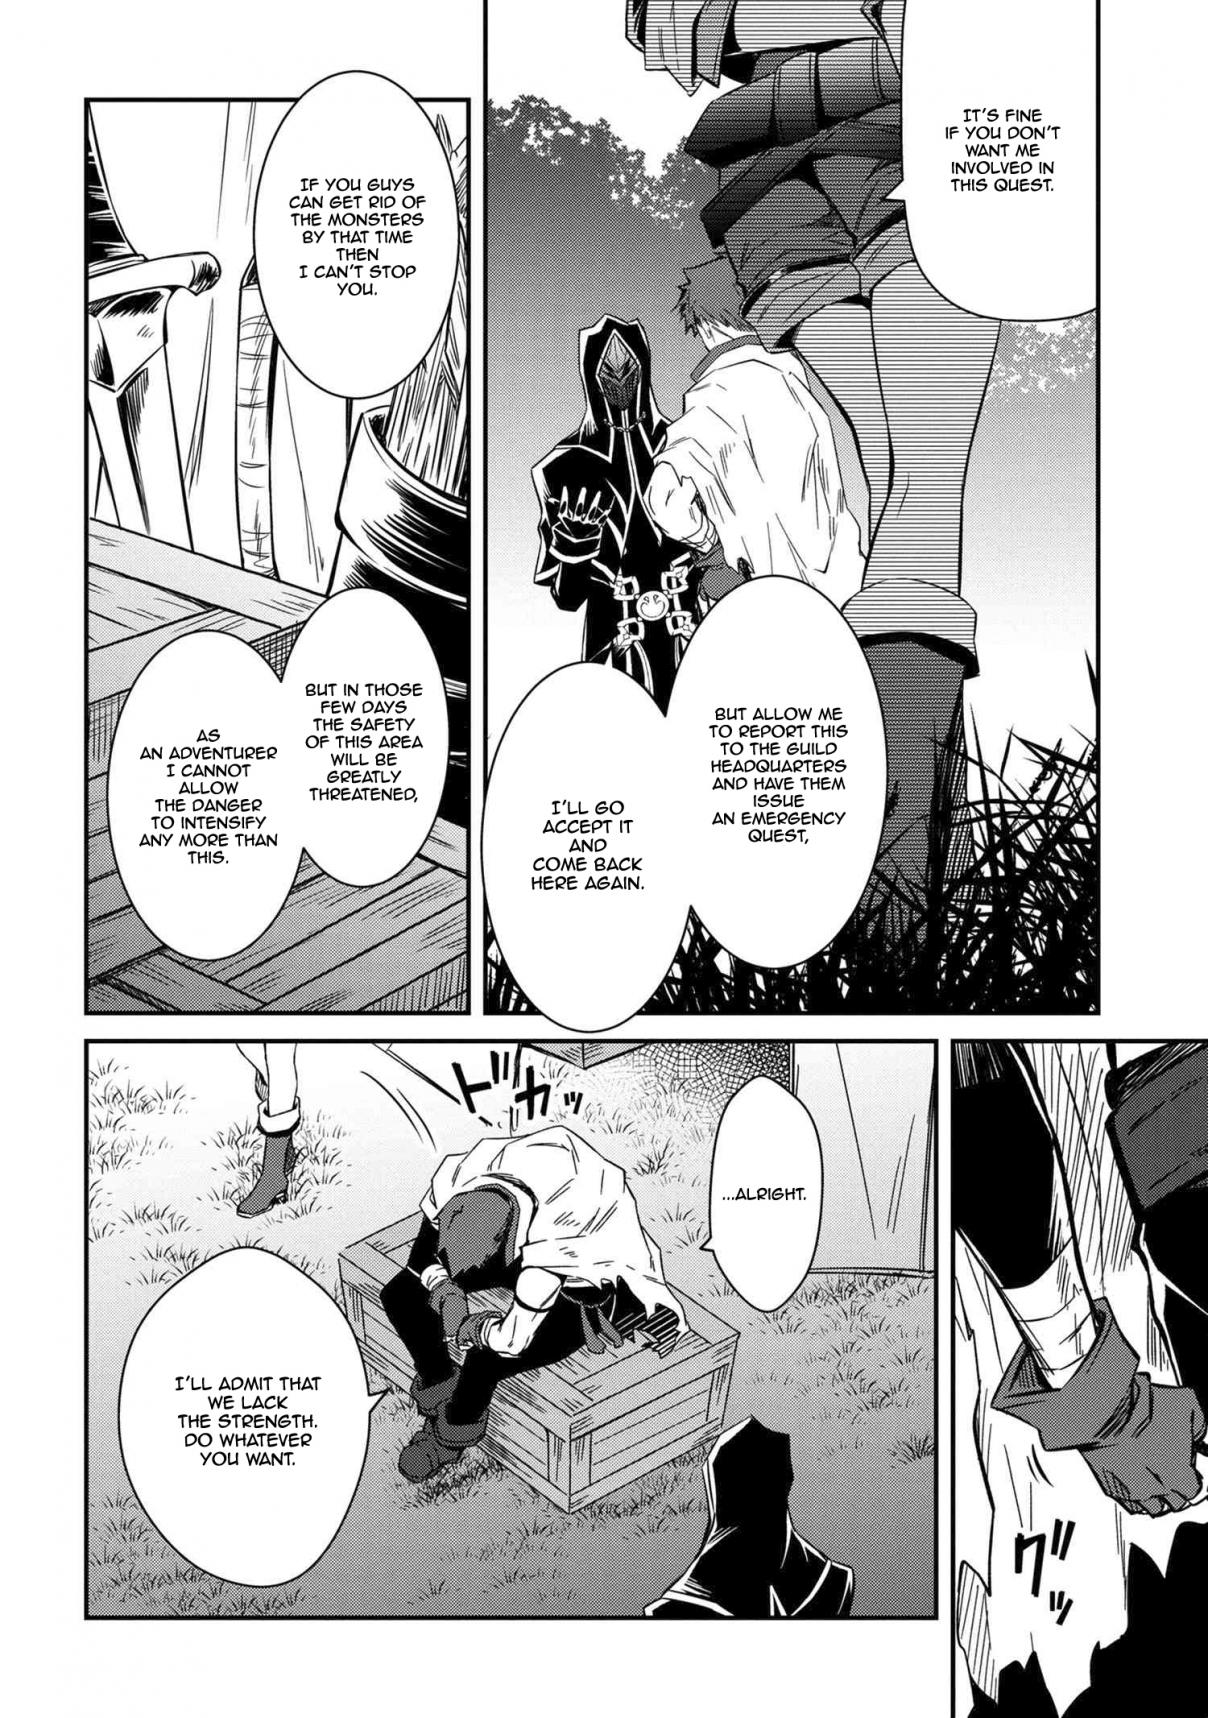 The Strongest Dull Prince’s Secret Battle for the Throne Vol. 1 Ch. 5